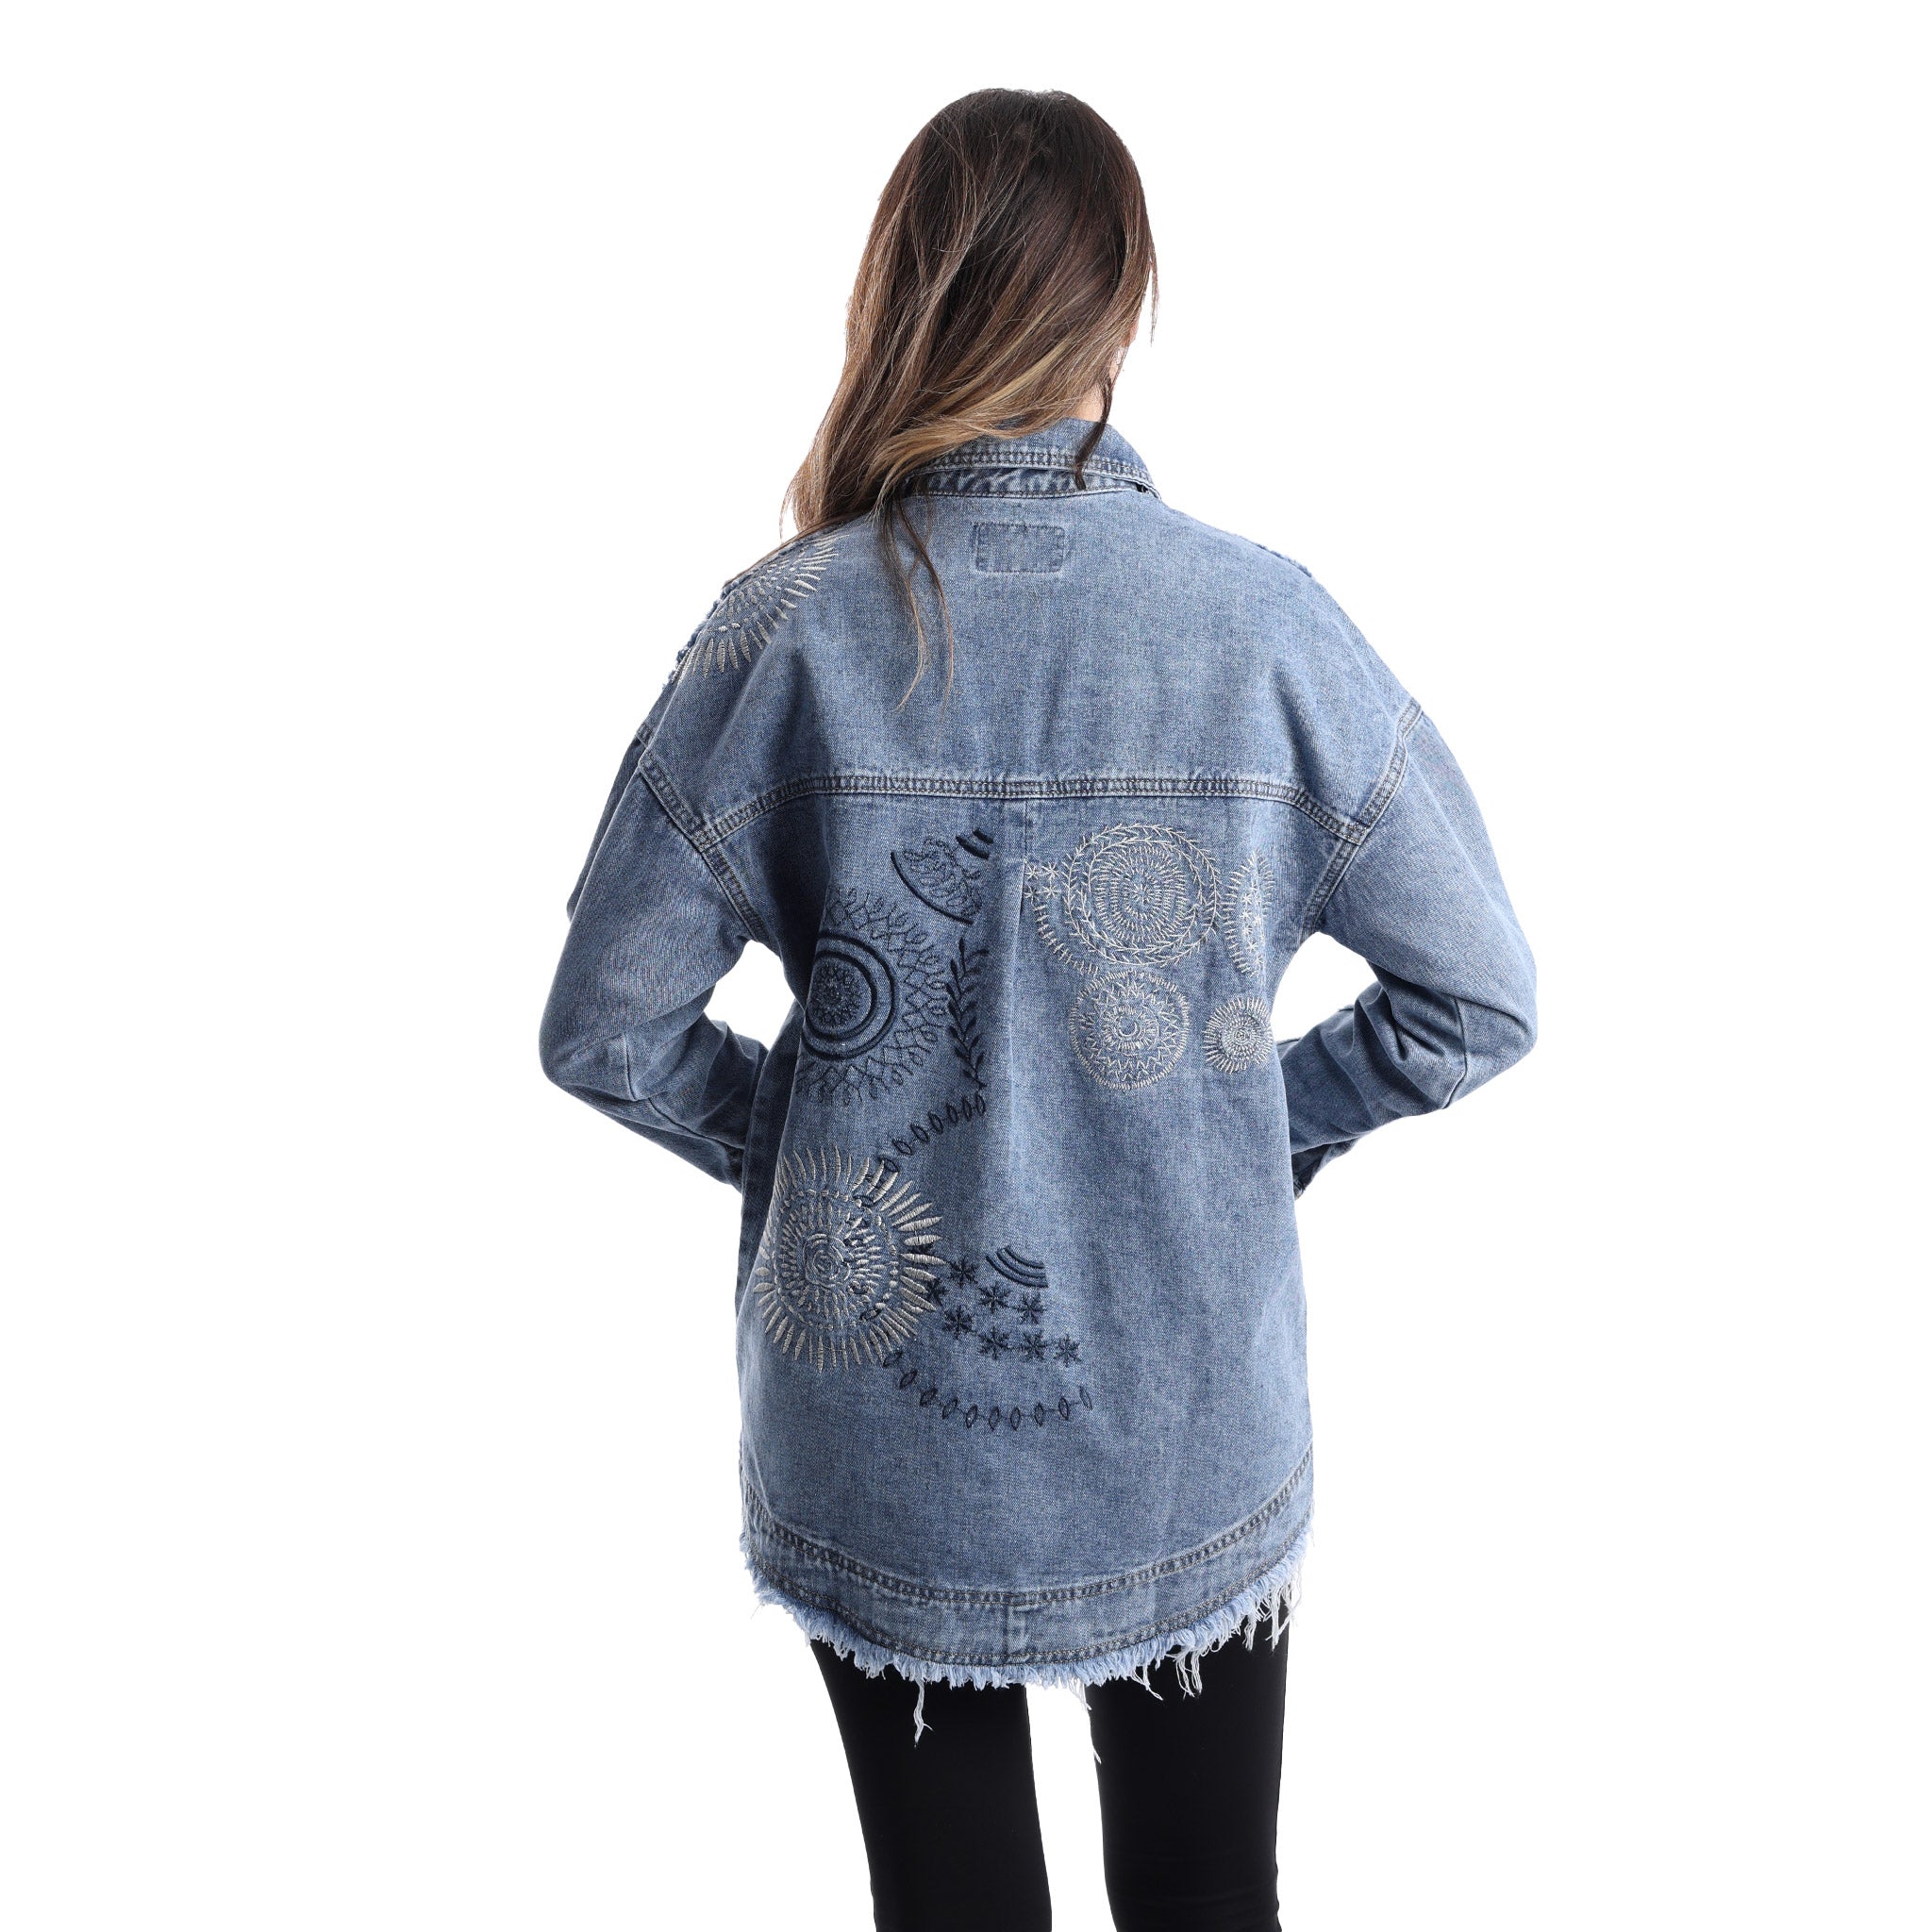 Jeans Jacket Ripped design